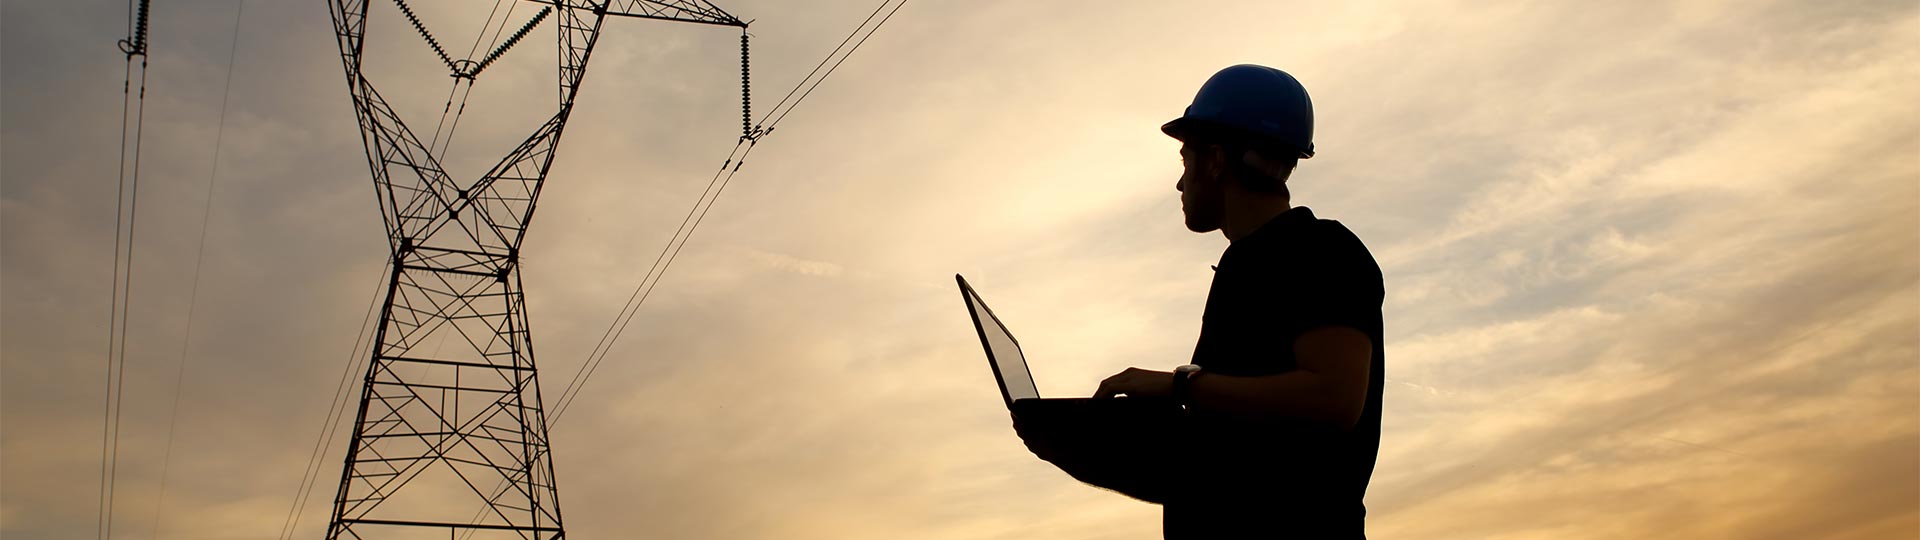 A person in a hard hat holding a computer